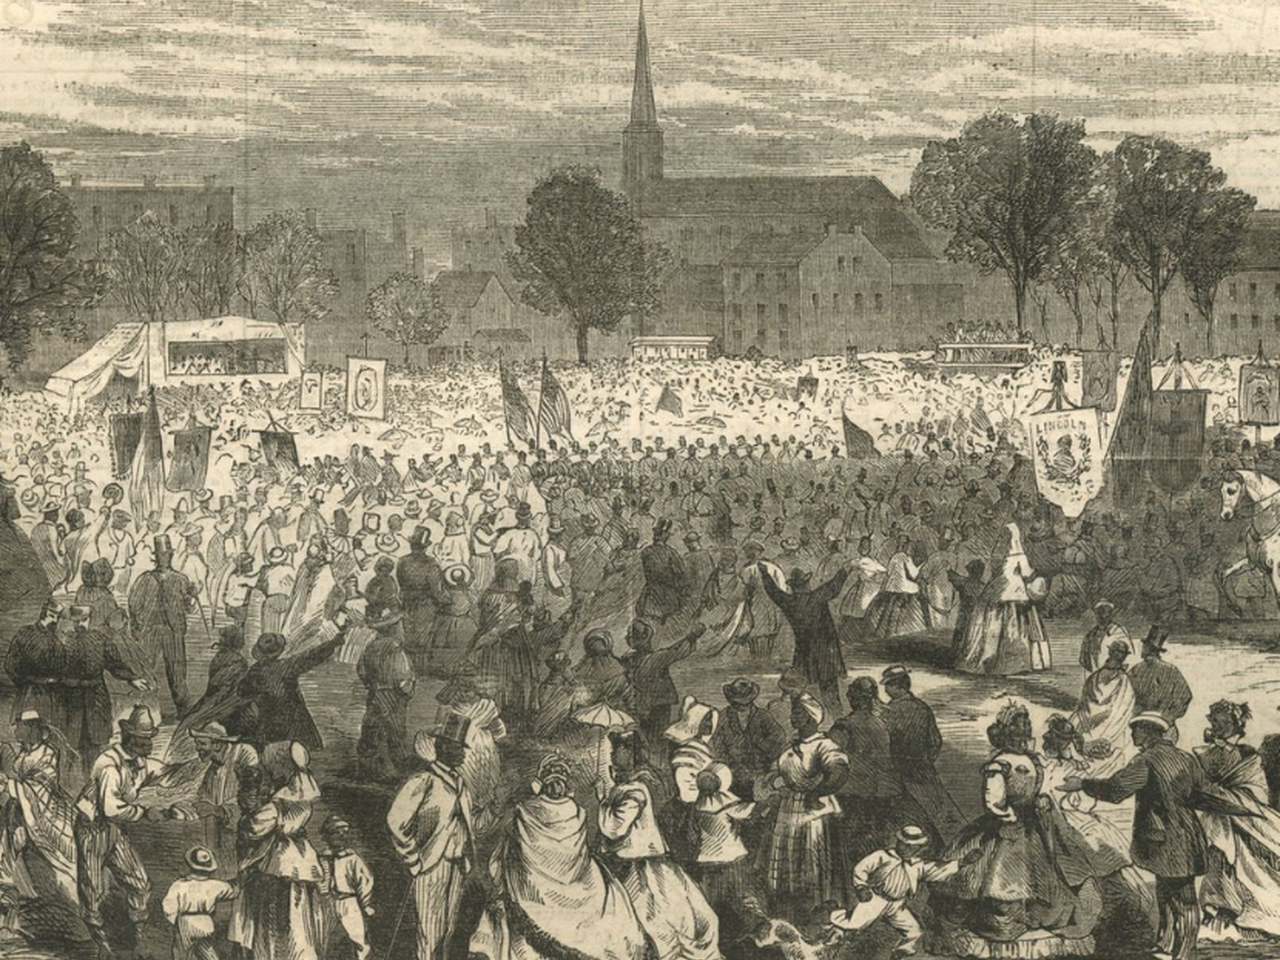 Illustration of crowd celebtrating the abolition of slavery in Washington, D.C.